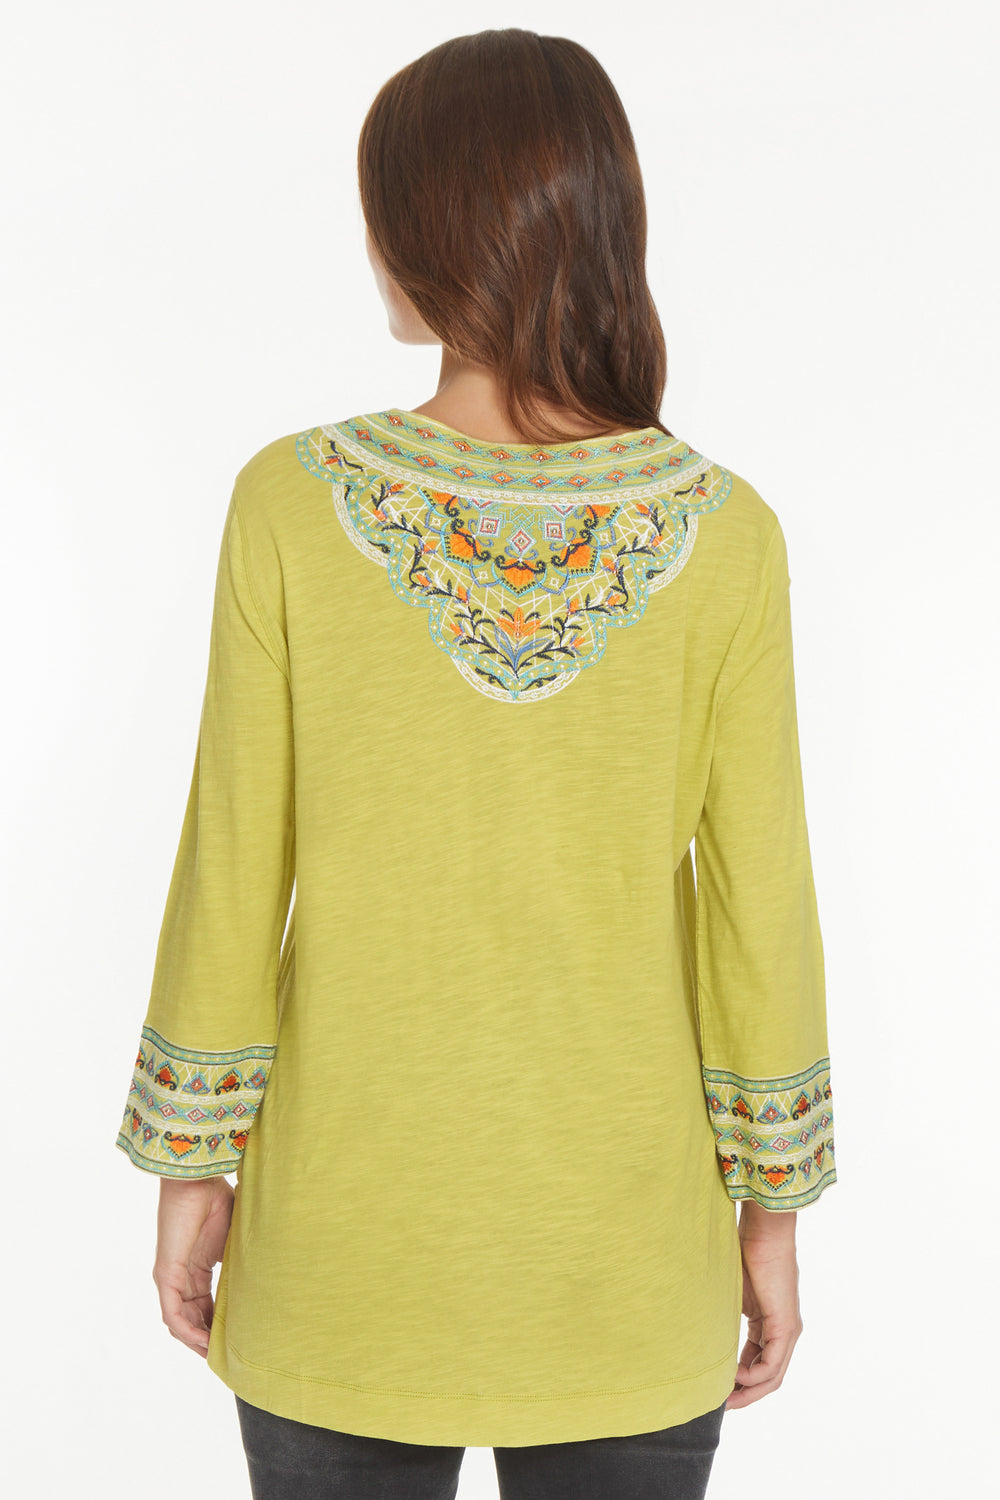 Citron Medallion Floral Embroidered V-Neck 3/4 Sleeve Knit Tunic